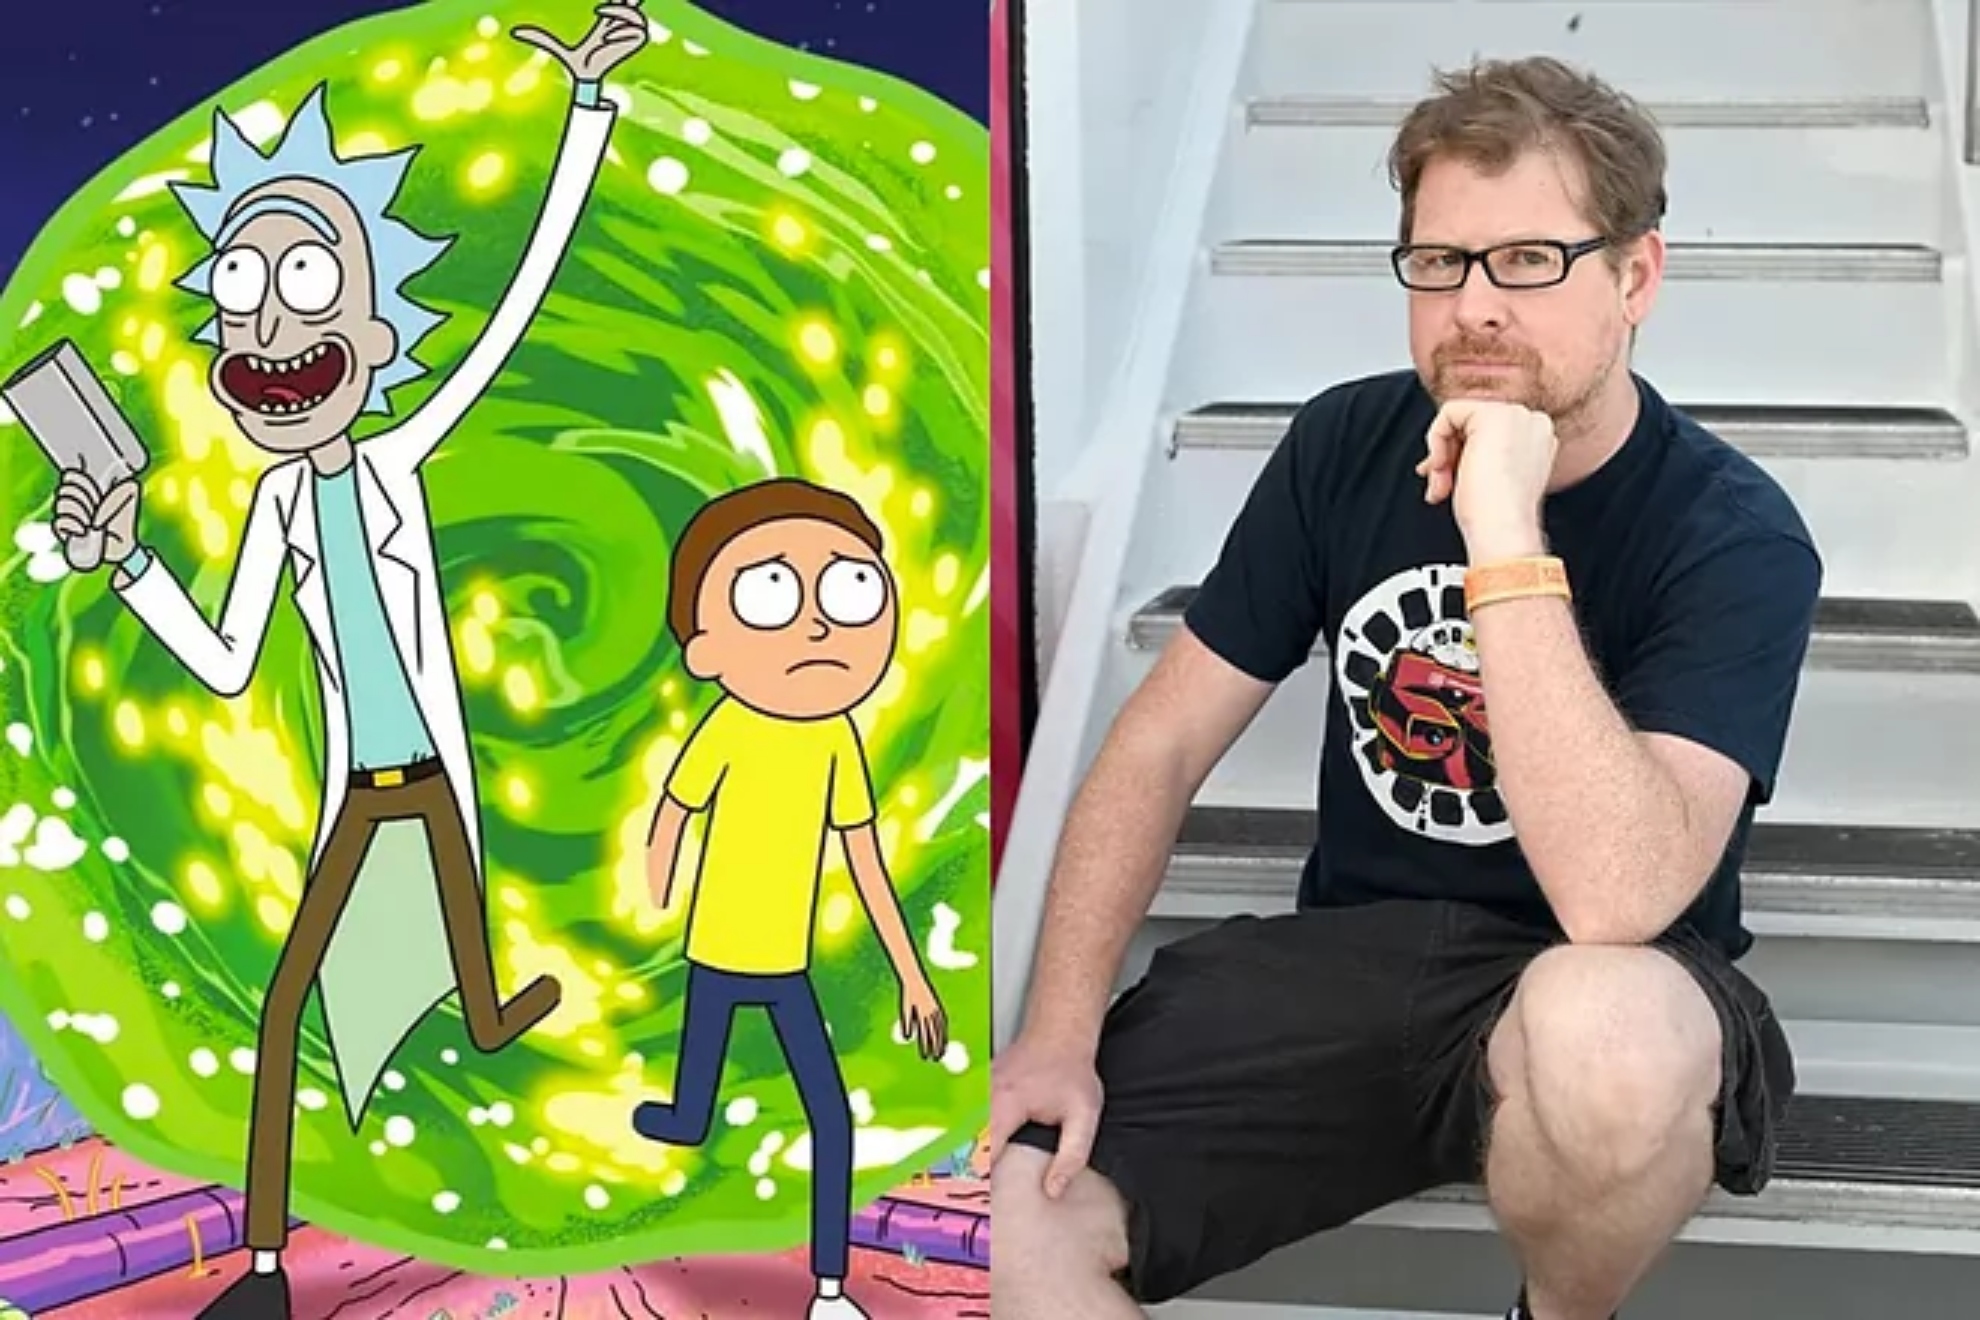 Rick and Morty co-creator Justin Roilan is accused of sexual abuse after clearing domestic abuse accusations